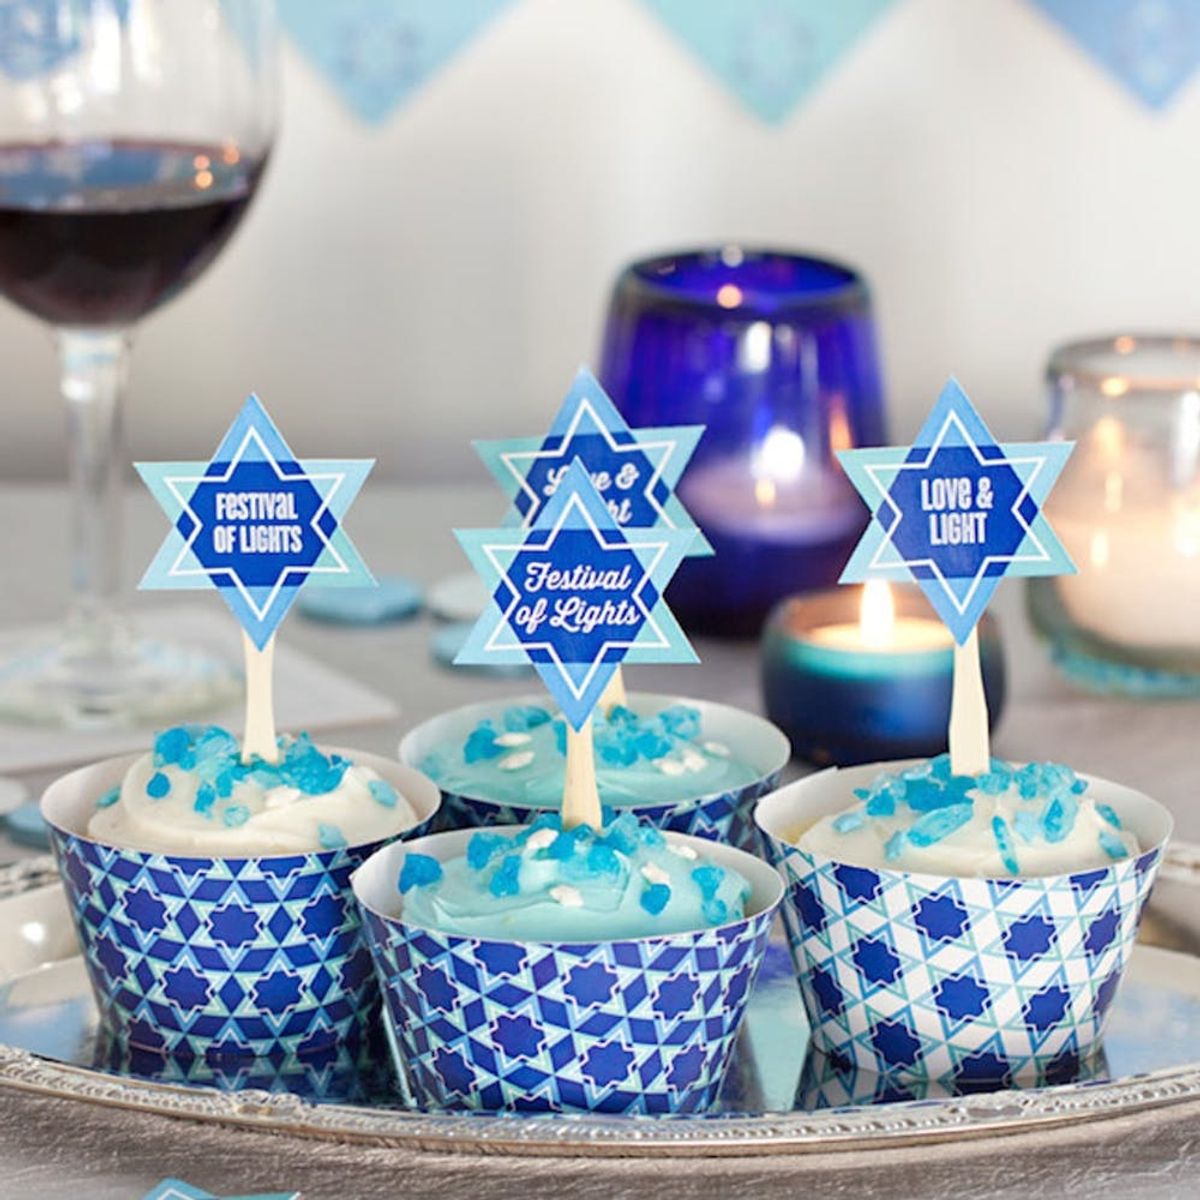 18 DIY Ideas to Decorate Your Home for Hanukkah